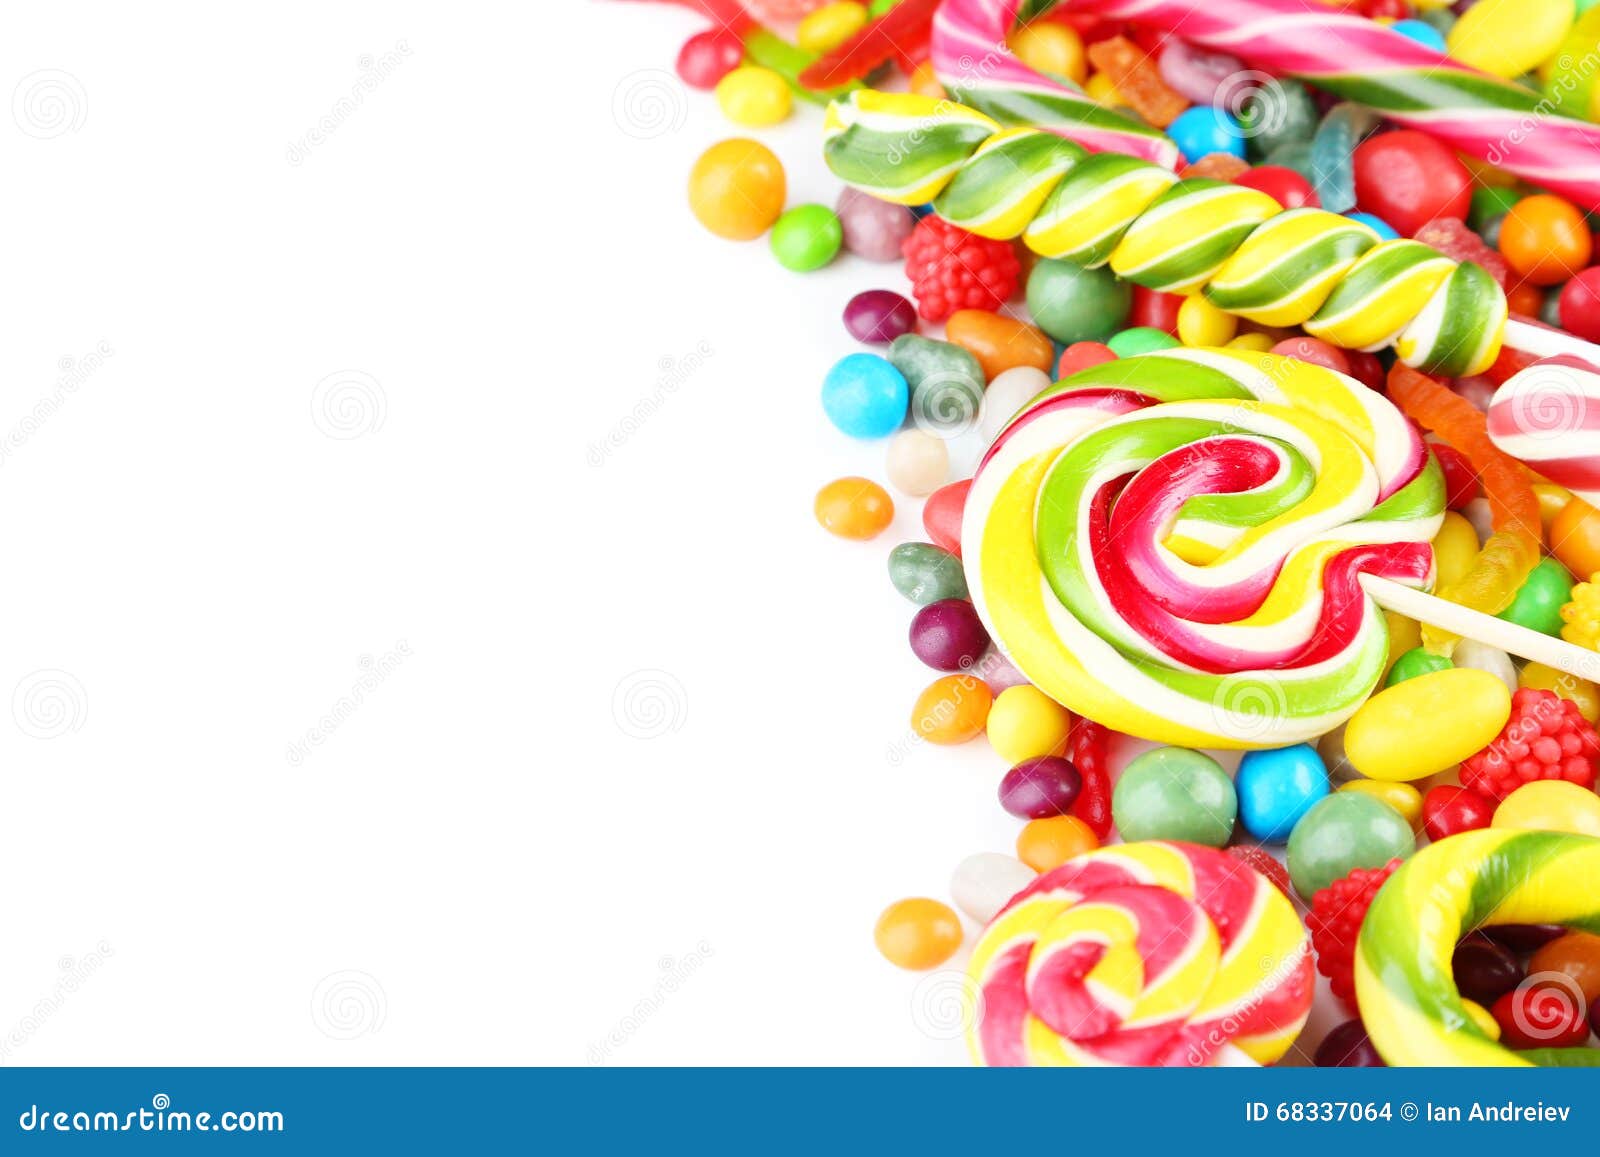 Fruit candies stock photo. Image of bright, holiday, striped - 68337064